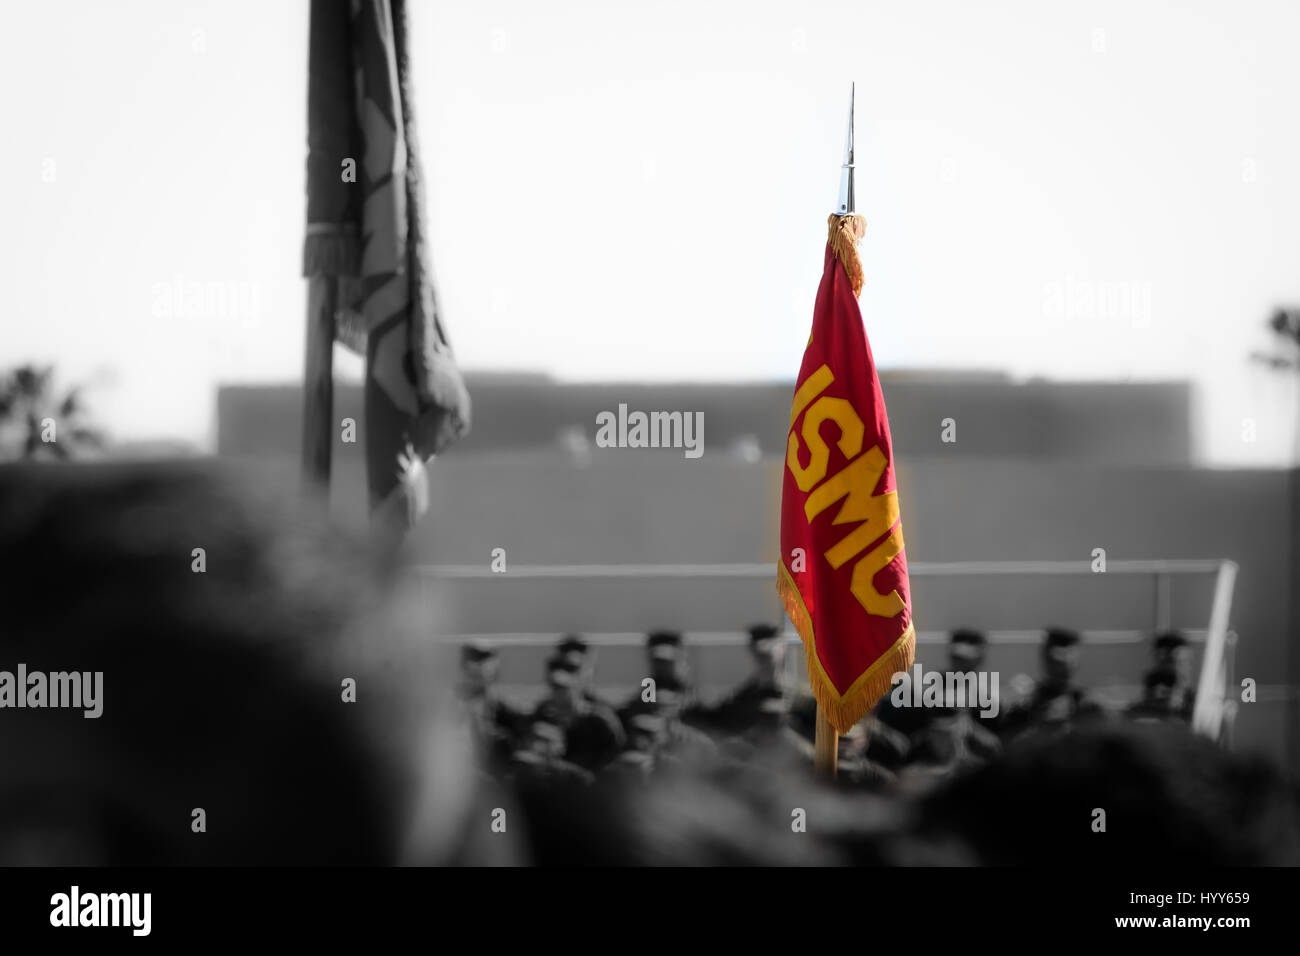 Flag displaying 'USMC' over a crowd of civilian and military watching the Battle Color Detachment perform at Marine Corps Recruit Depot San Diego, CA Stock Photo